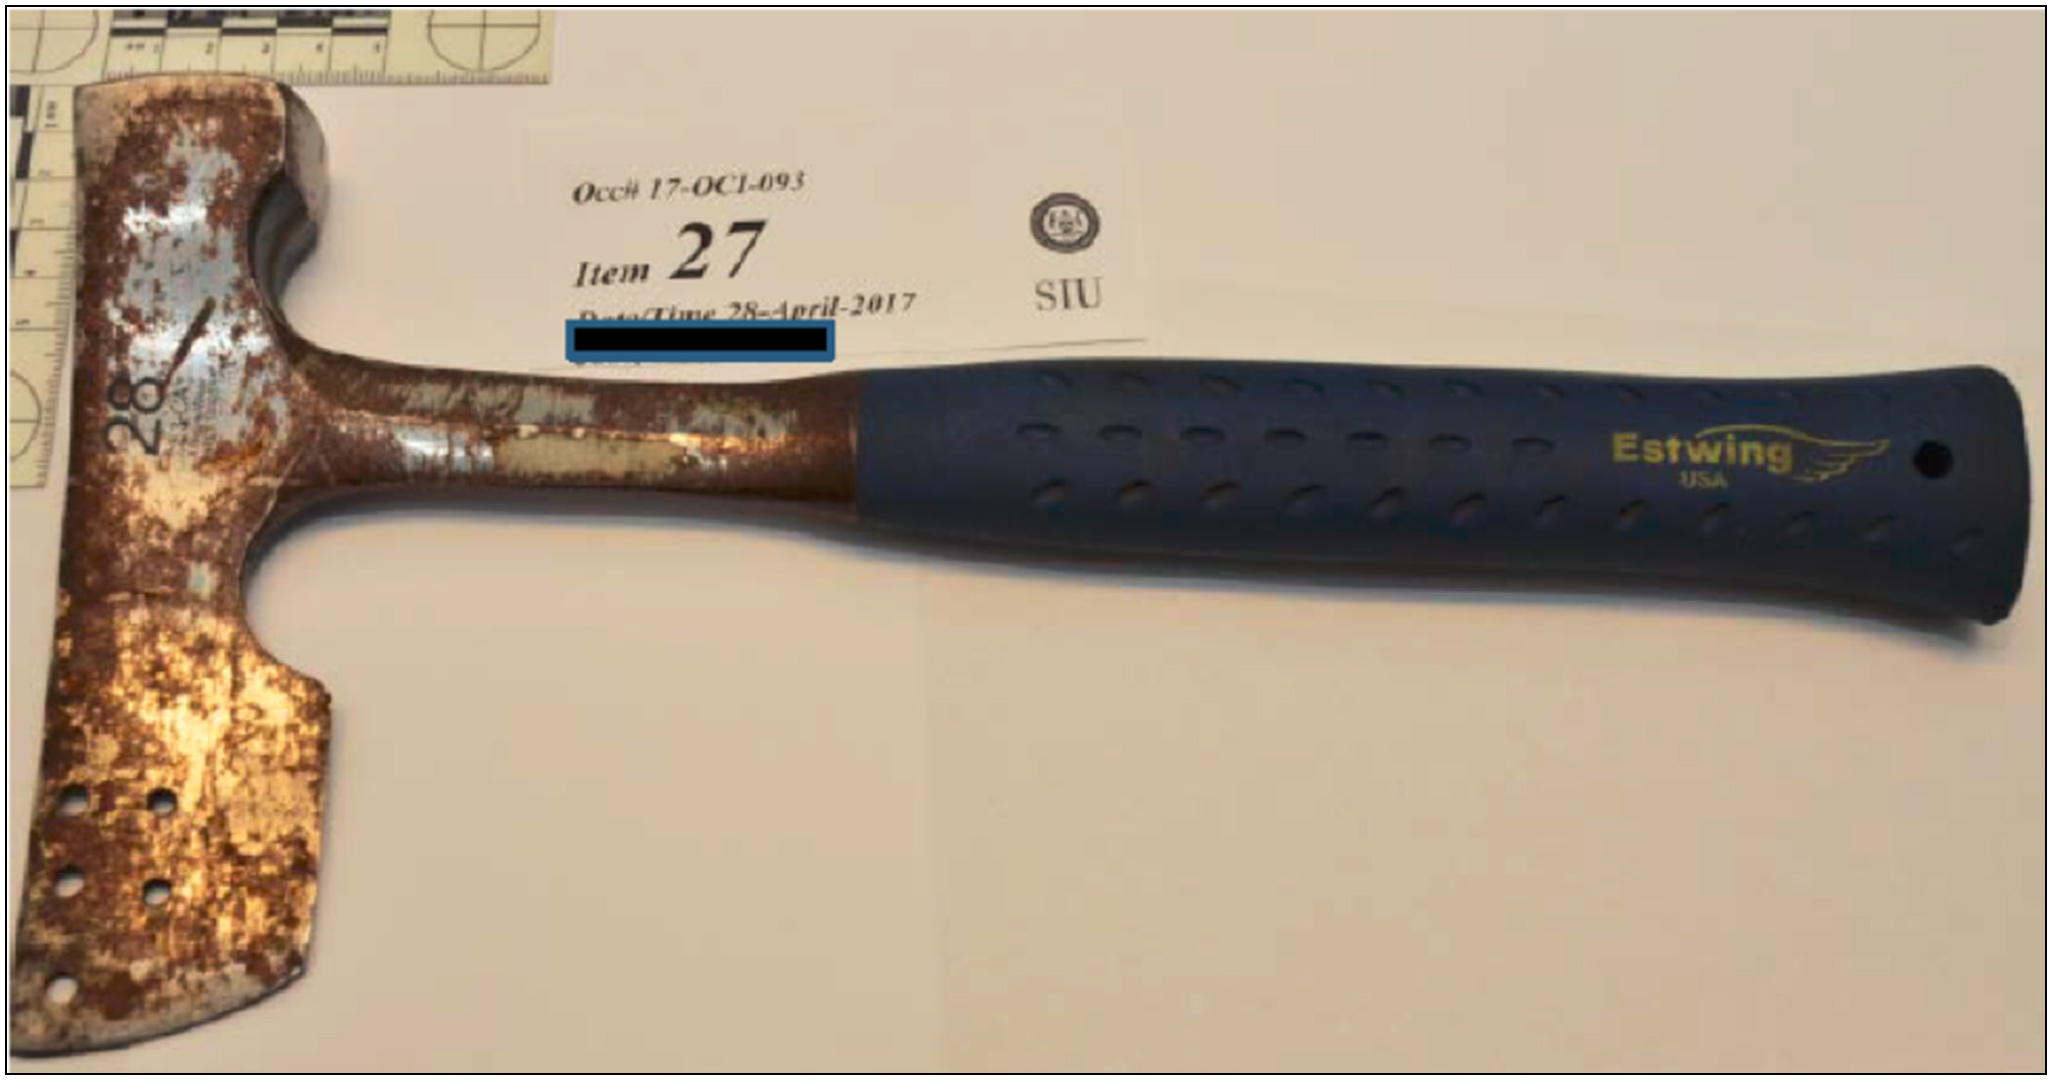 A photo of the axe taken from the Complainant’s waistband following his arrest